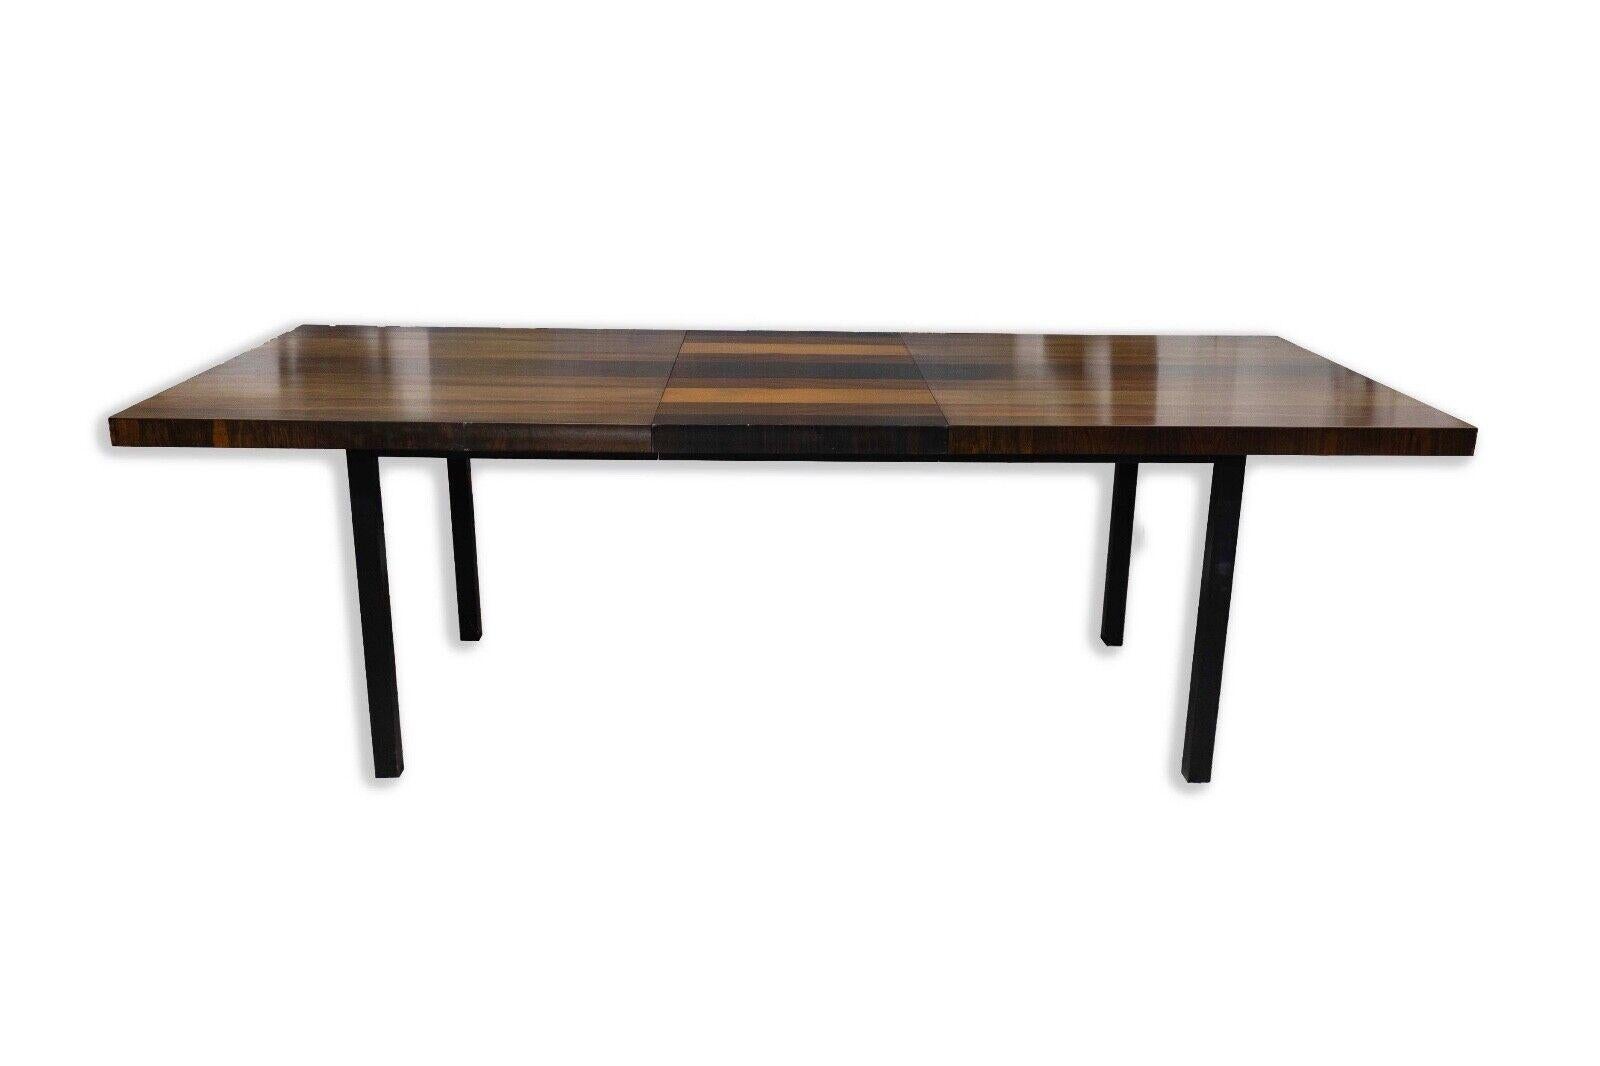 20th Century Milo Baughman for Directional Expandable Dining Table w/ Leaf Mid Century Modern